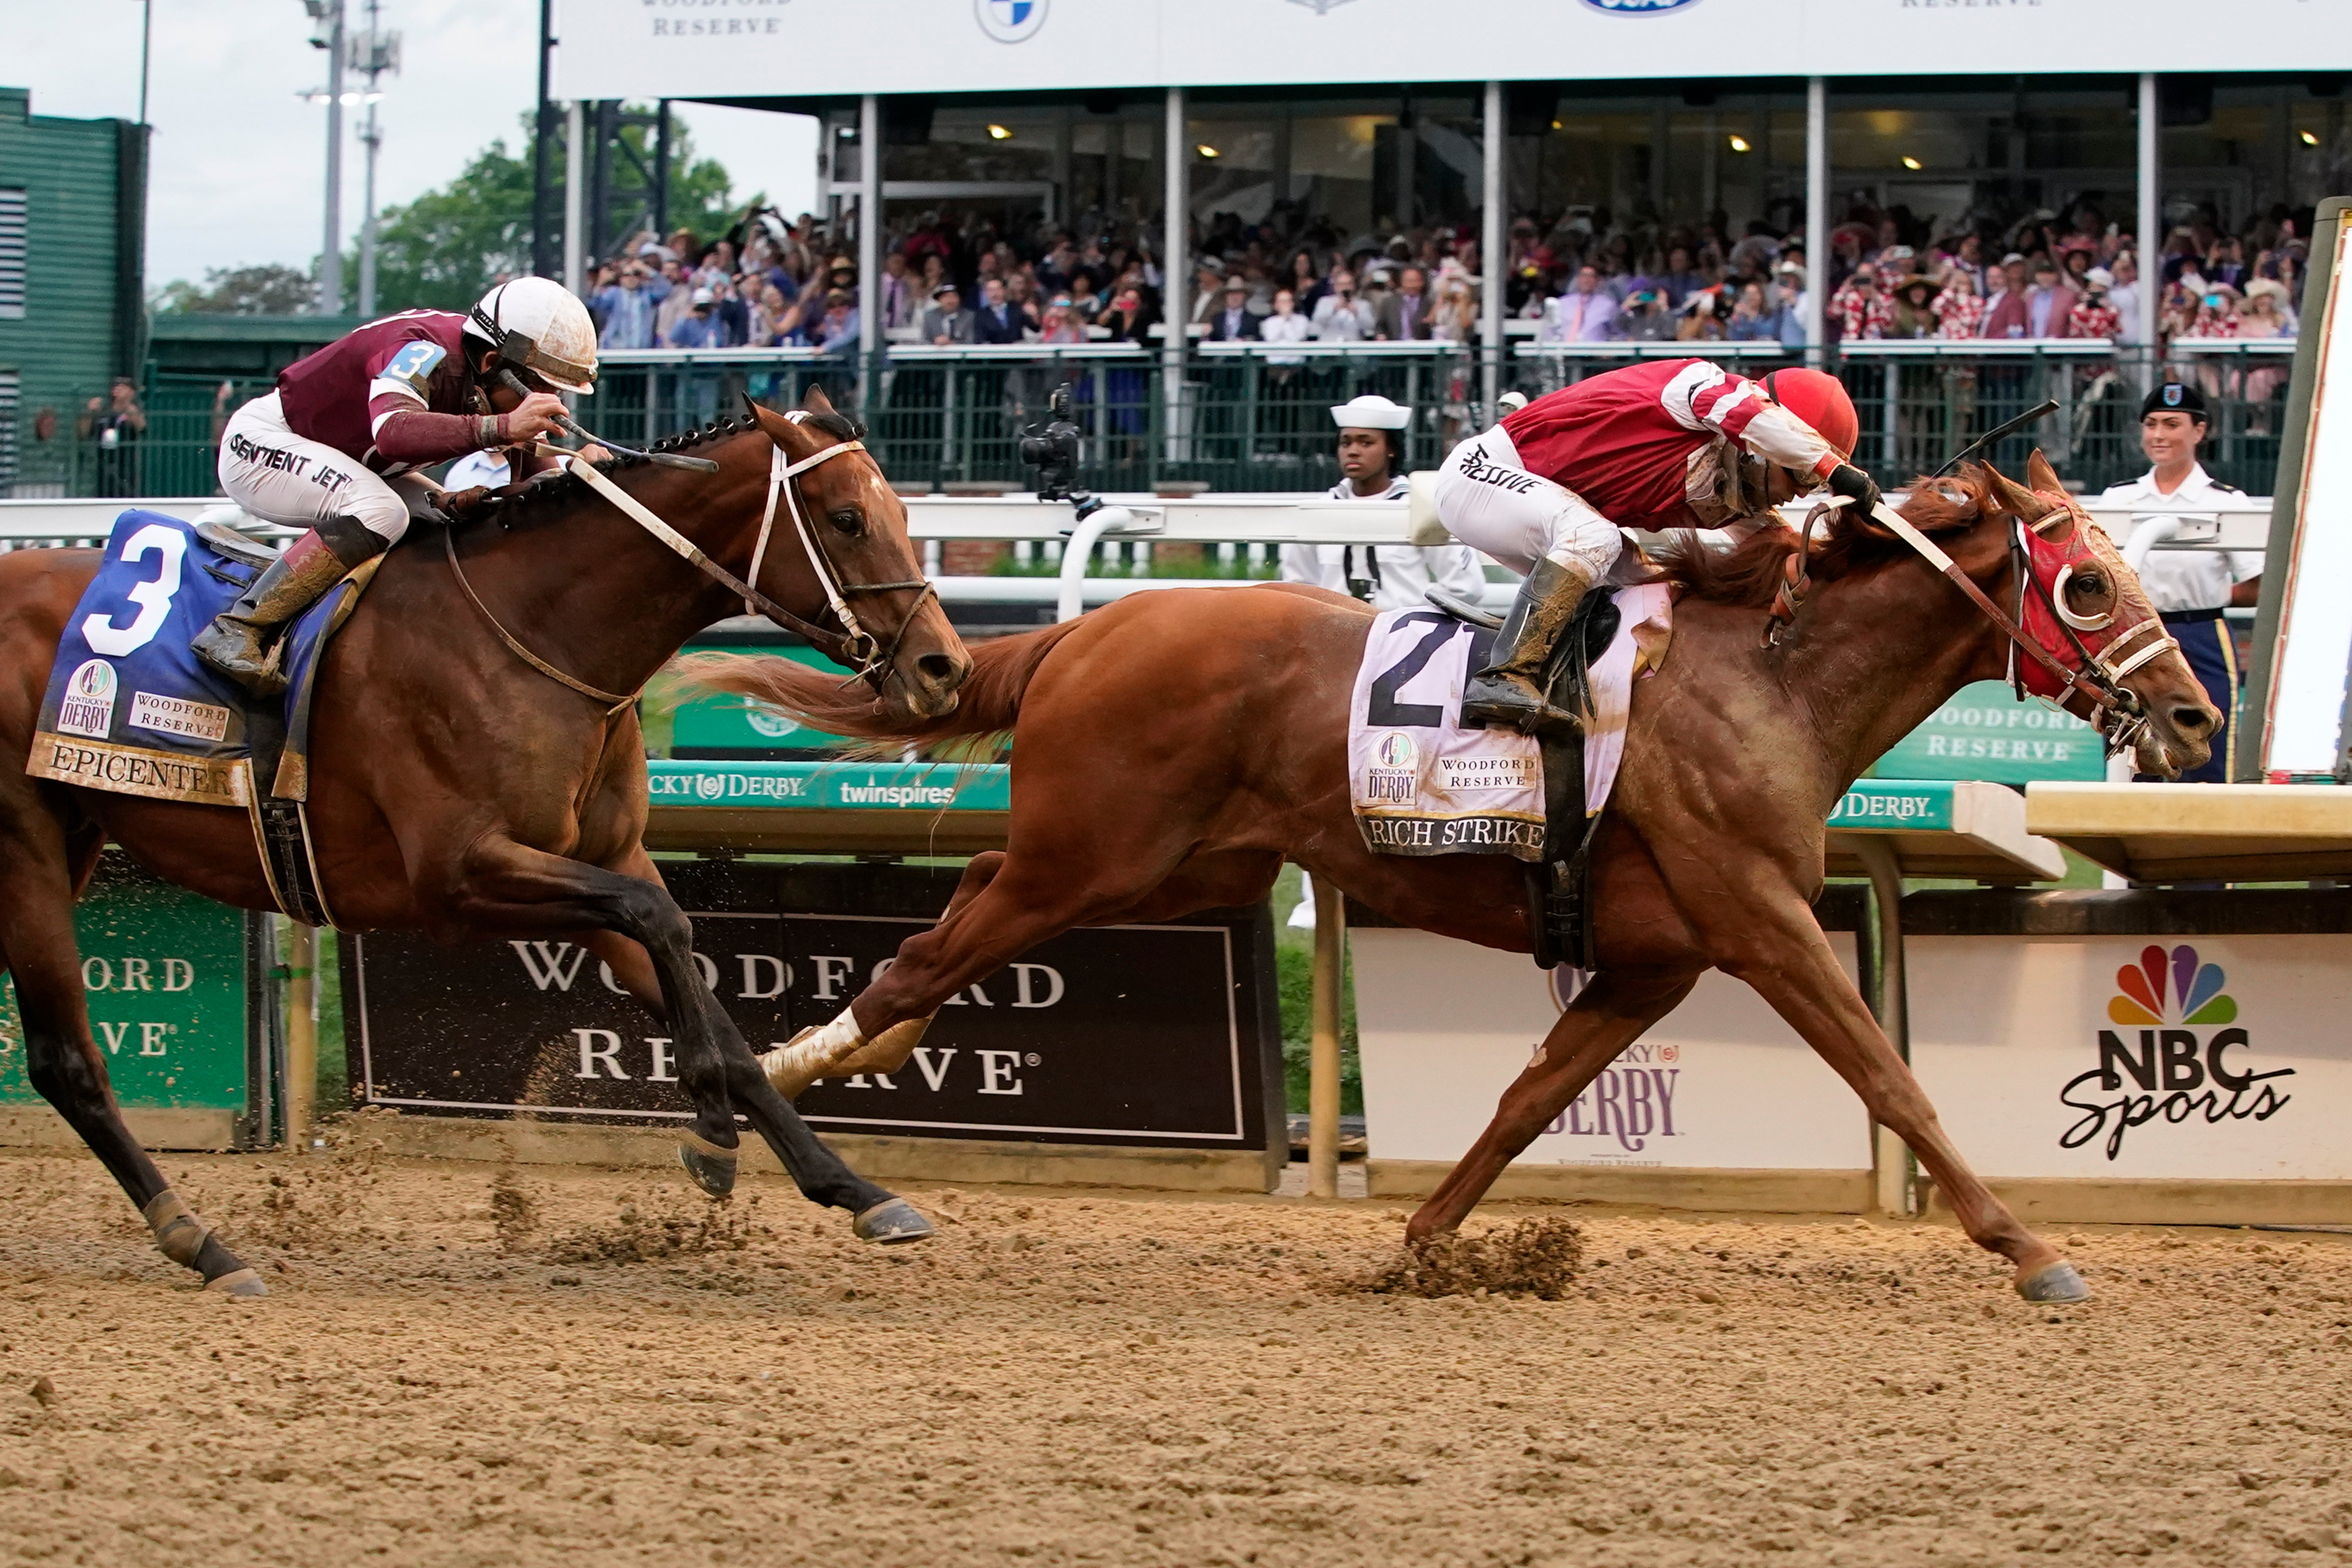 Rich Strike surged to a stunning victory in the 148th Kentucky Derby